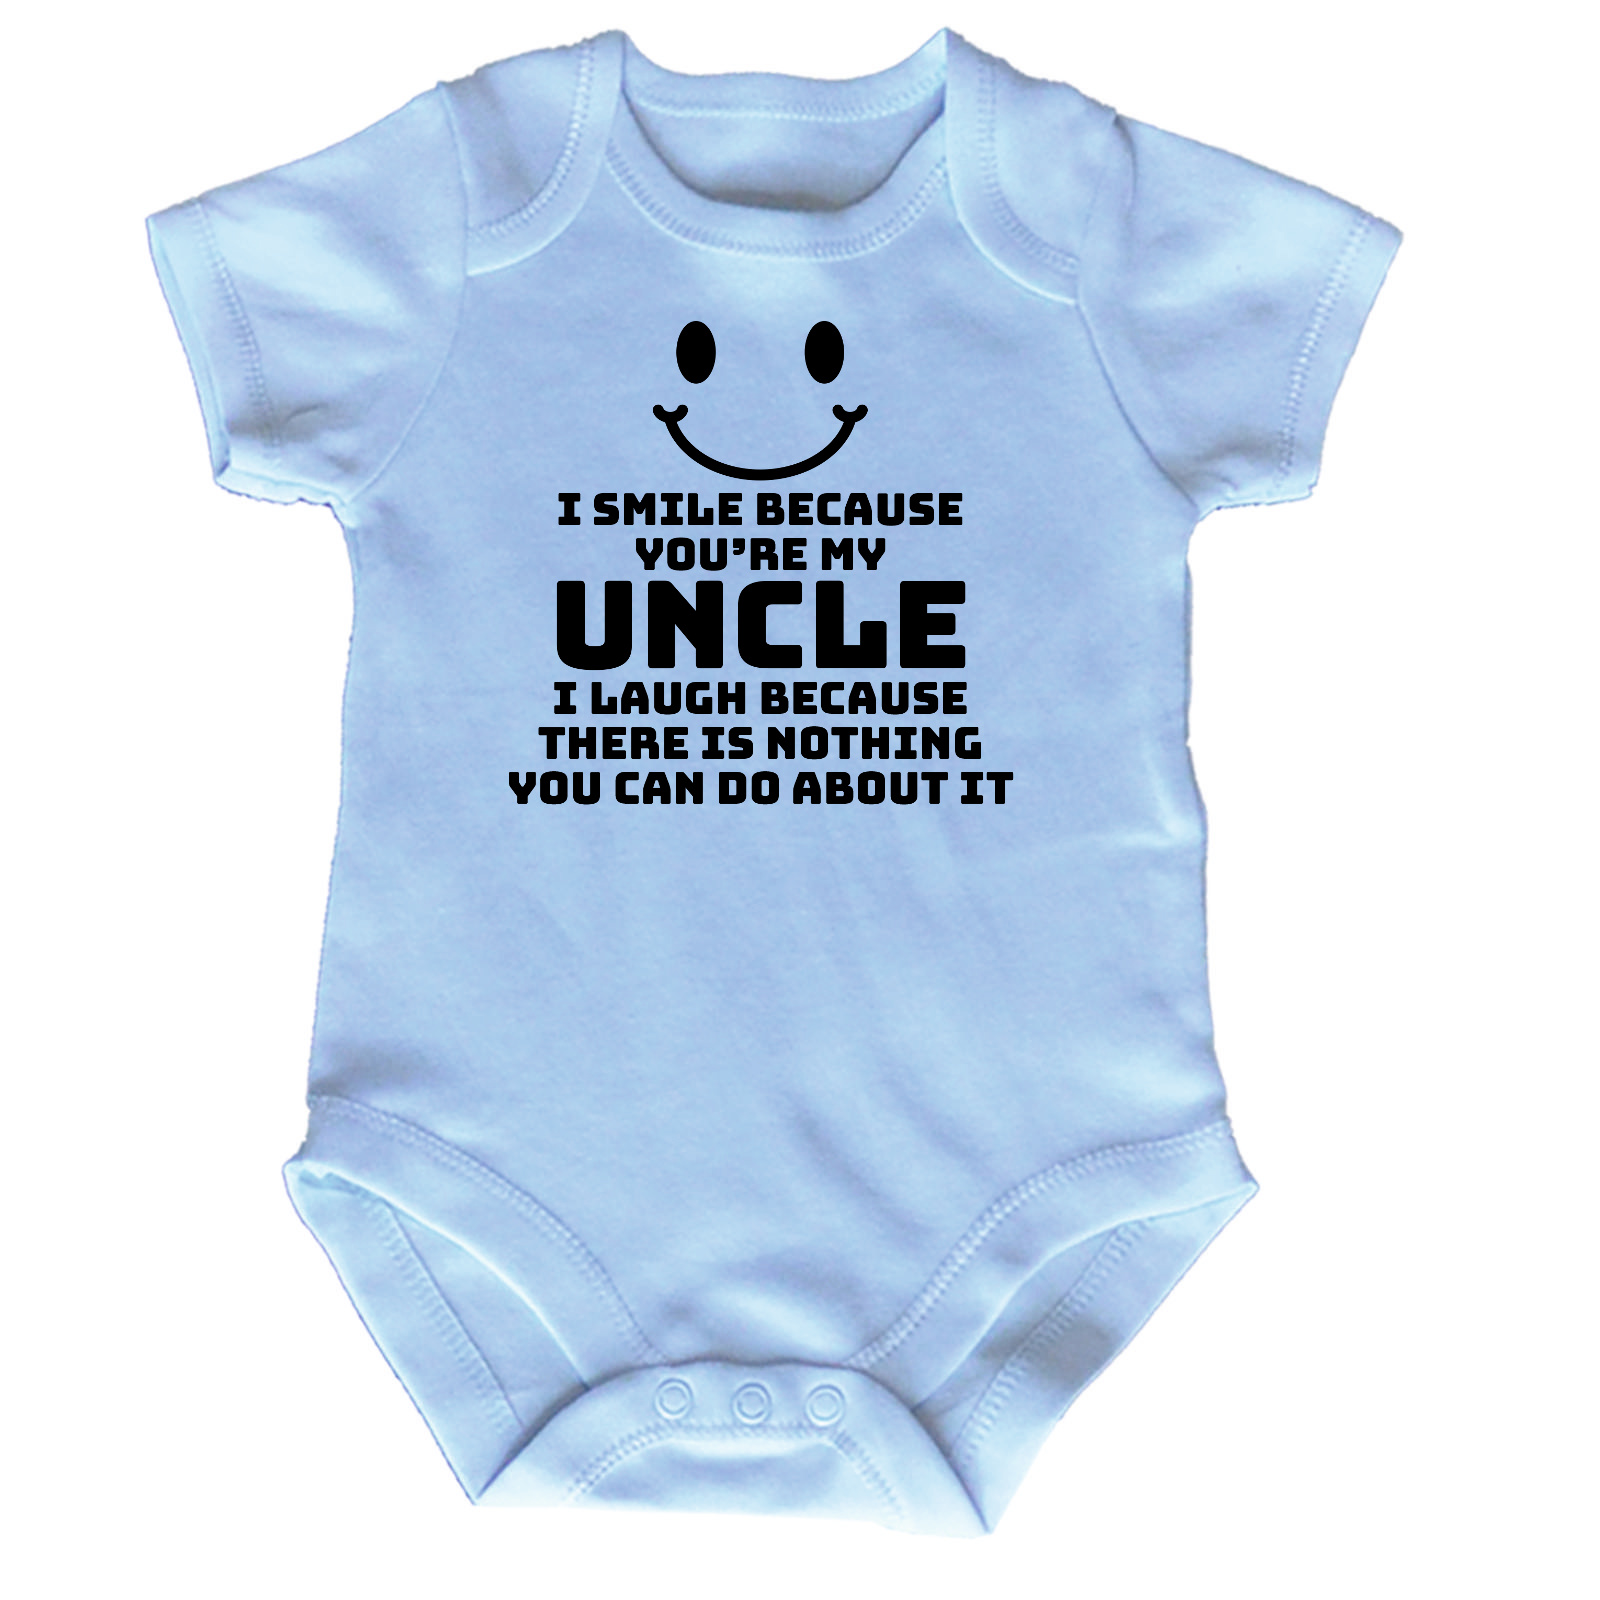 Funny Baby Infants Babygrow Romper Jumpsuit I Smile Because Youre My Uncle 